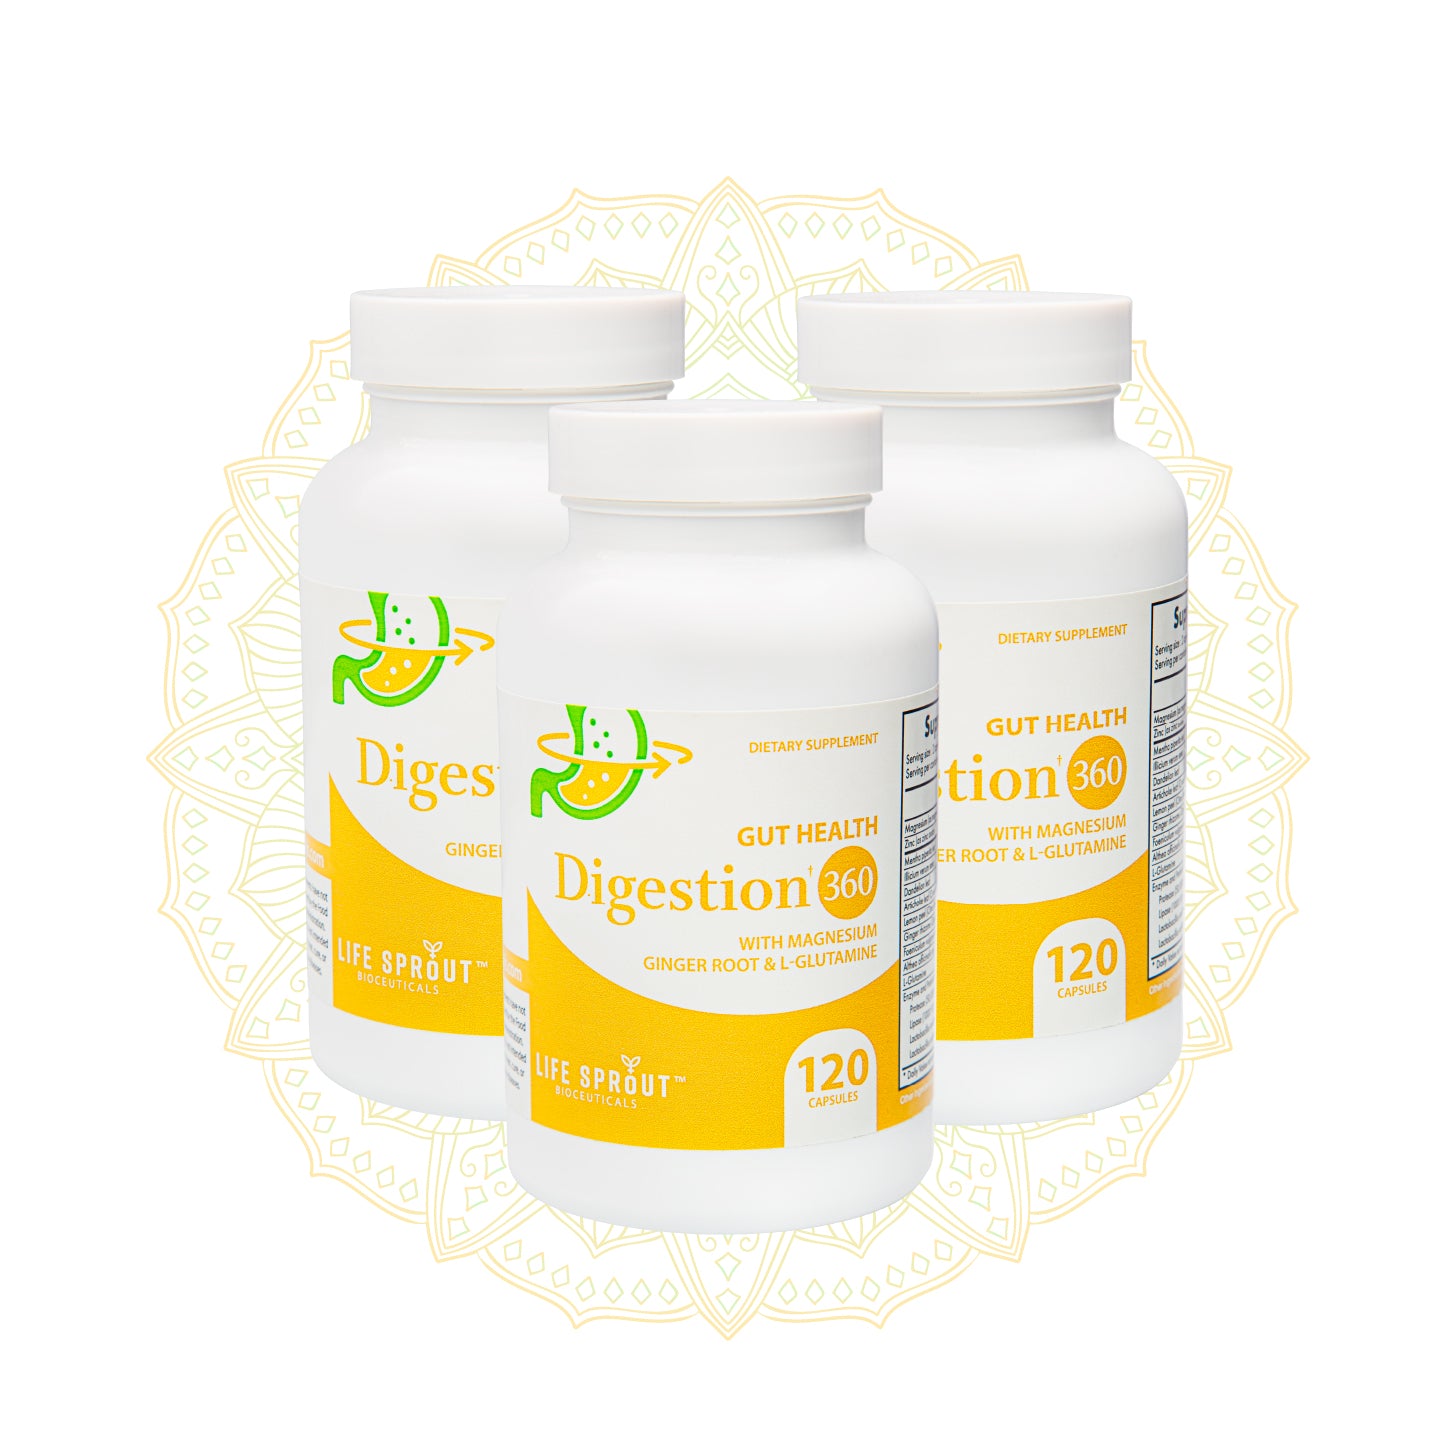 Digestion 360 - Digestion and Gut Health - New Improved Formula